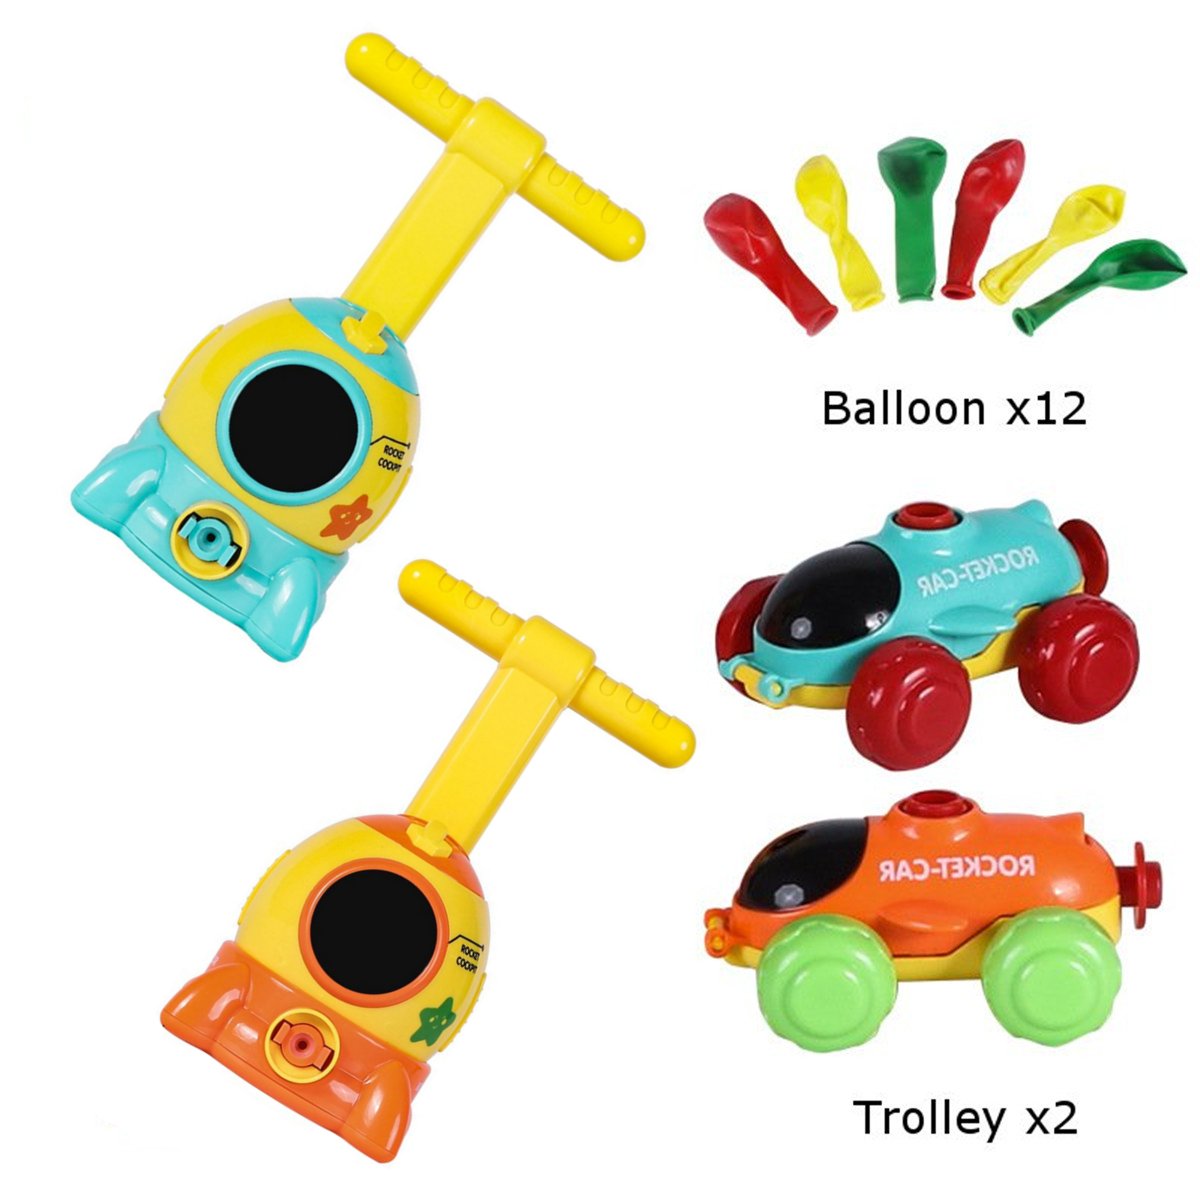 Inertial-Power-Balloon-Car-Intellectual-Development-Learning-Education-Science-Experiment-Toy-for-Ki-1698287-10